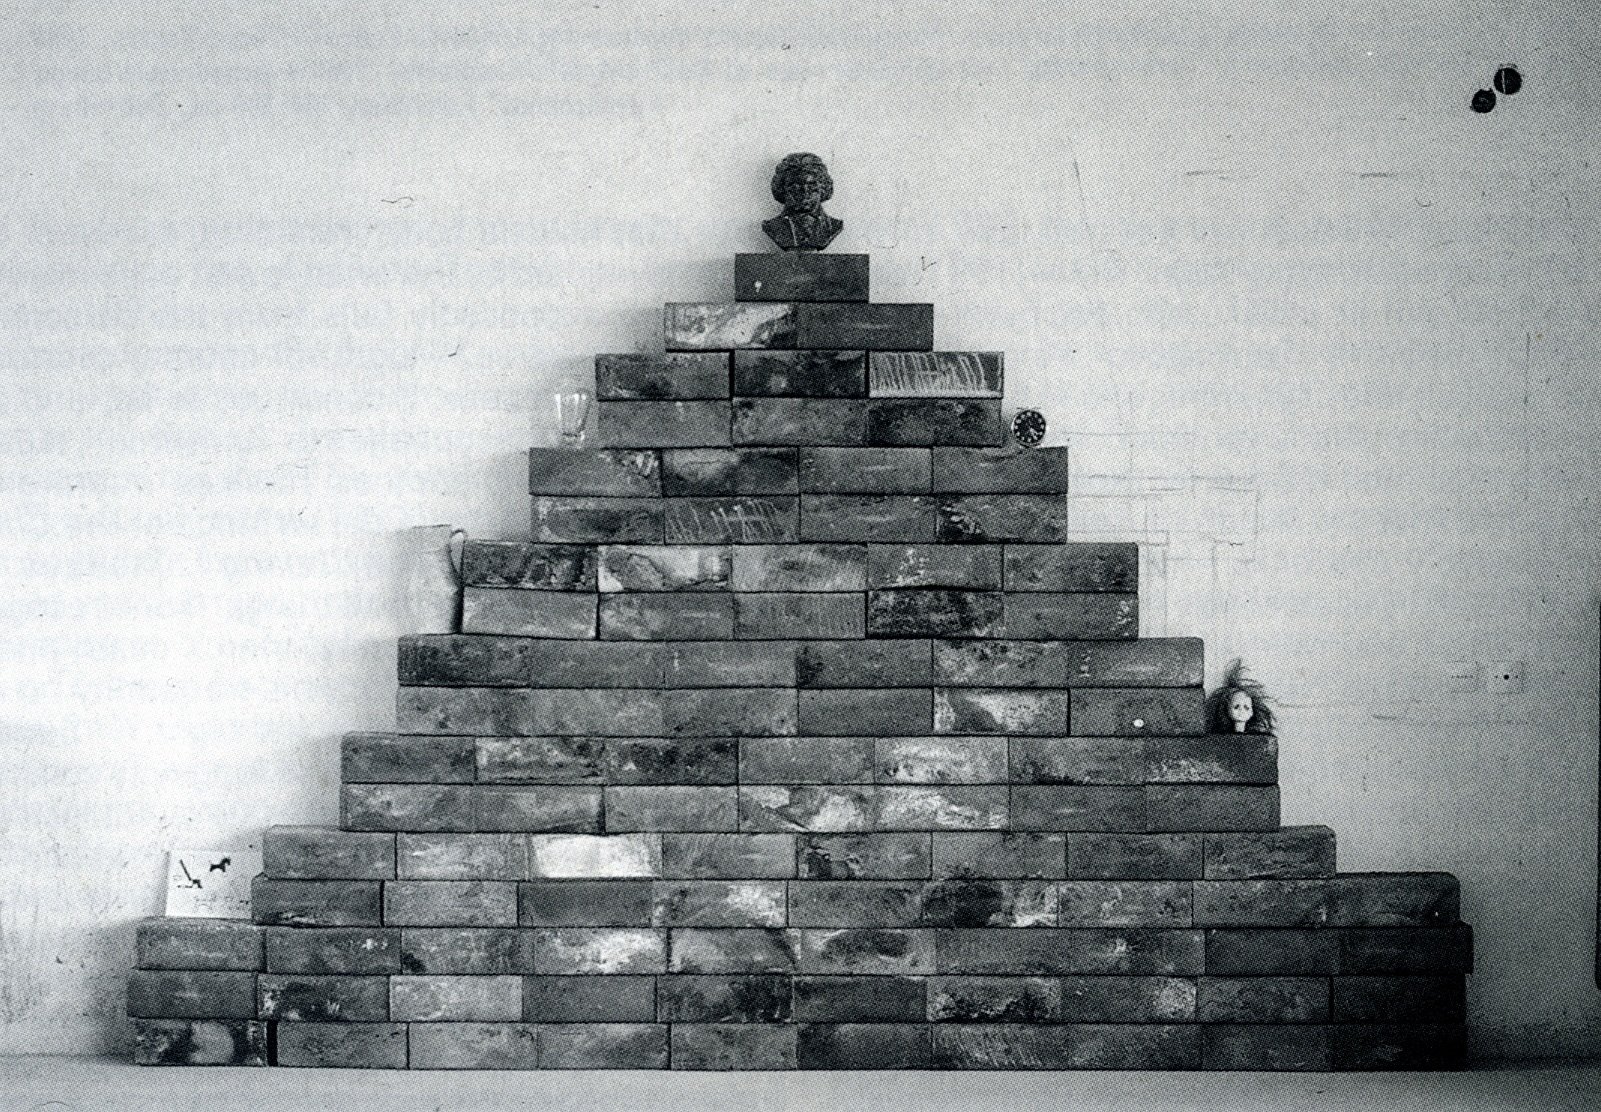 Thanasis Totsikas, The Stairway of Life, metal boxes, 300 x 250 x 15 cm, 1988. Installation view, Hyper-product, Club 22, Athens, 1988